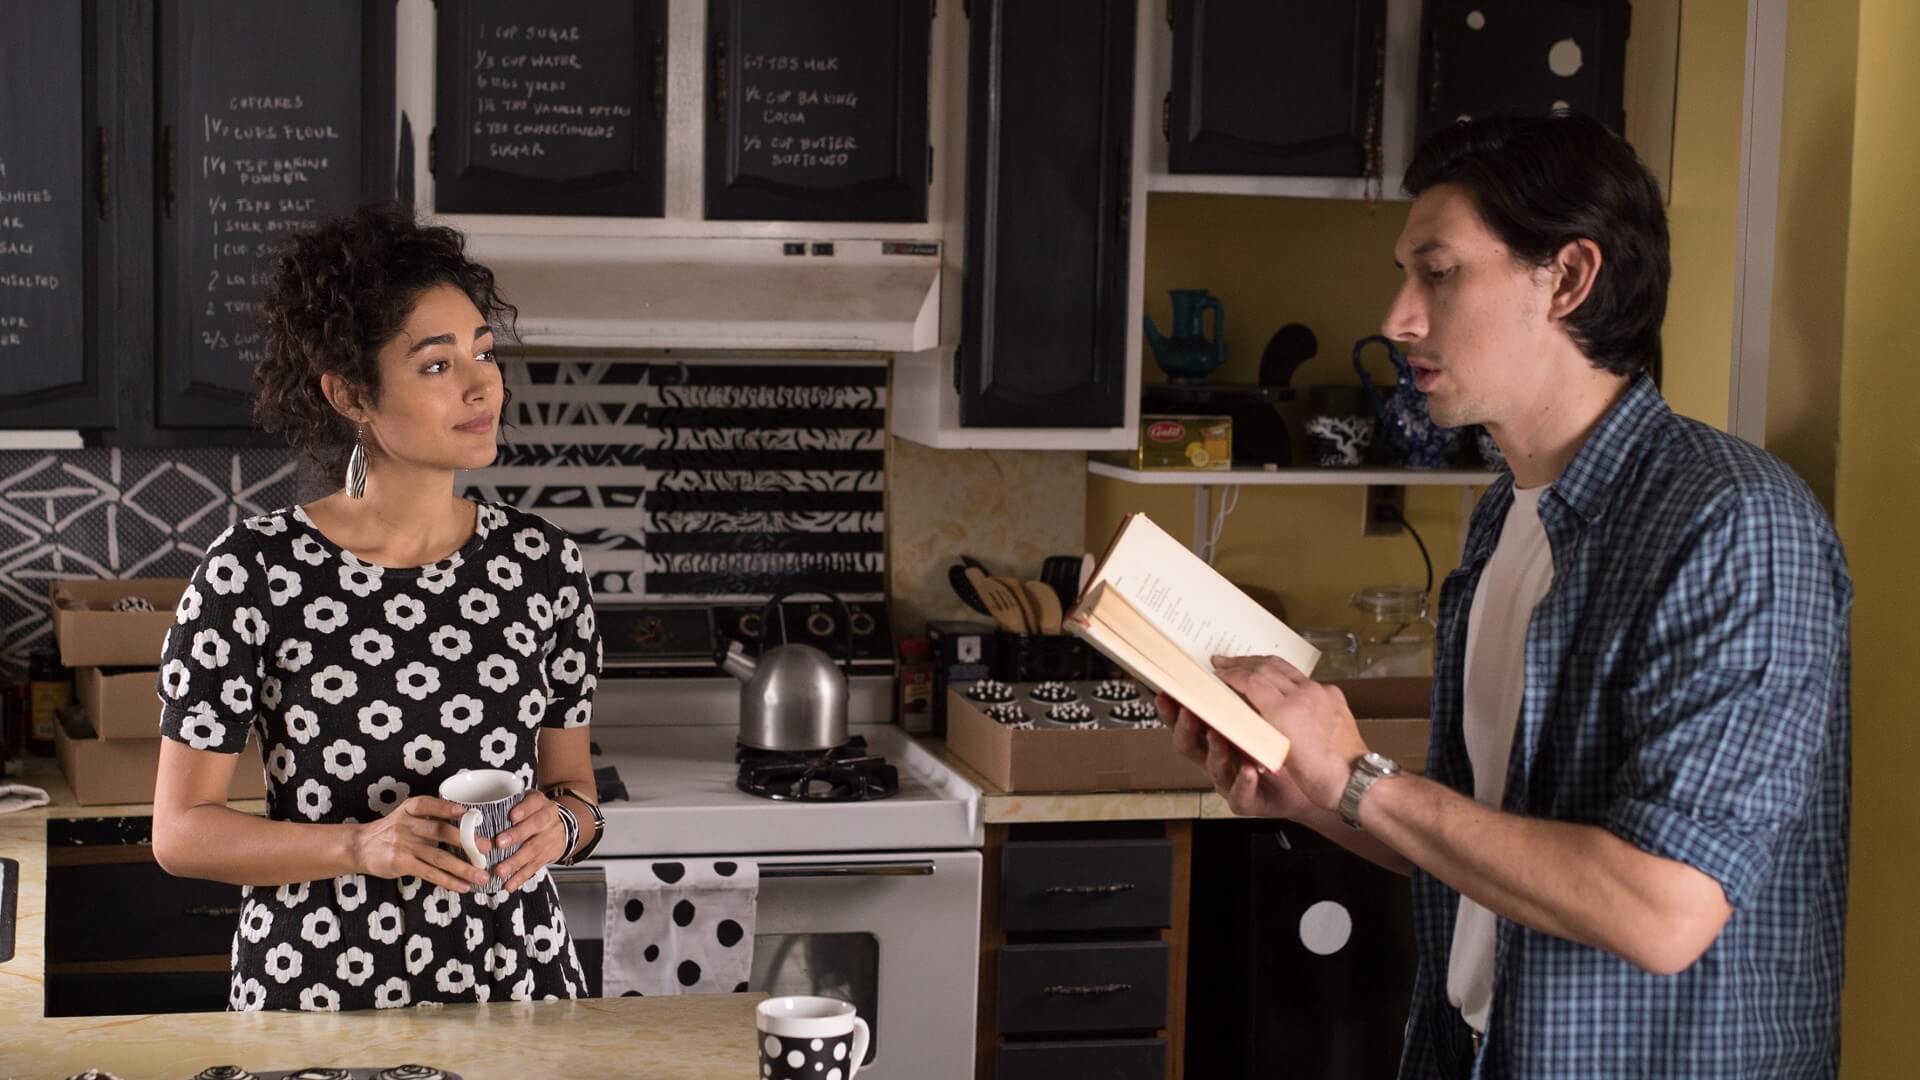 A scene from the Paterson movie